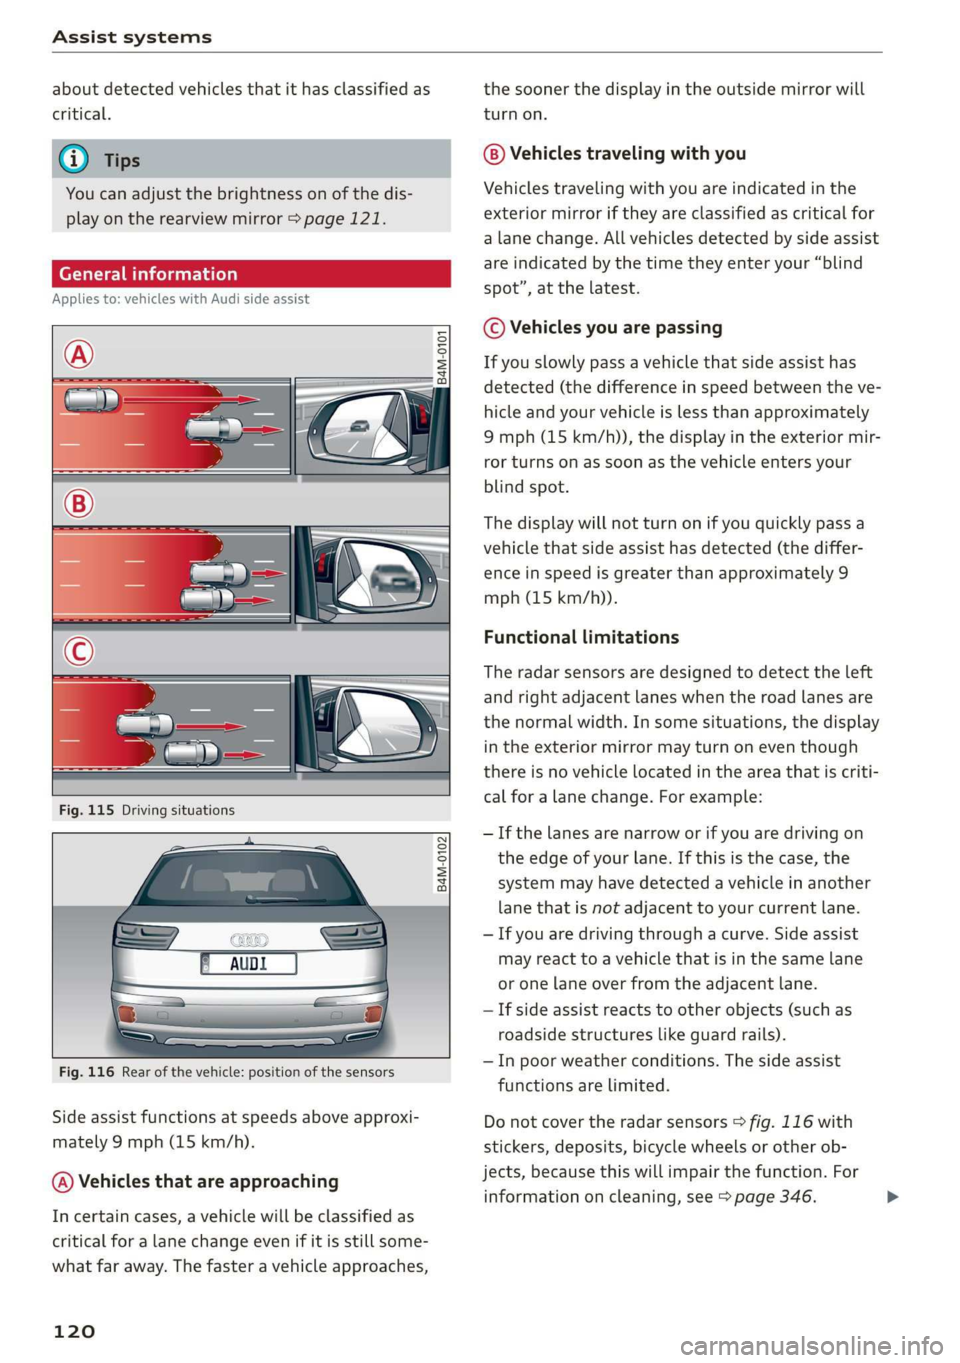 AUDI Q7 2019  Owner´s Manual Assistsystems
 
aboutdetectedvehiclesthatithasclassifiedas
critical.
iG)Tips
Youcanadjustthebrightnessonofthedis-
playontherearviewmirror>page121.
  
CeeaeLo}
Appliesto:vehicleswithAudisideassist
 
 
